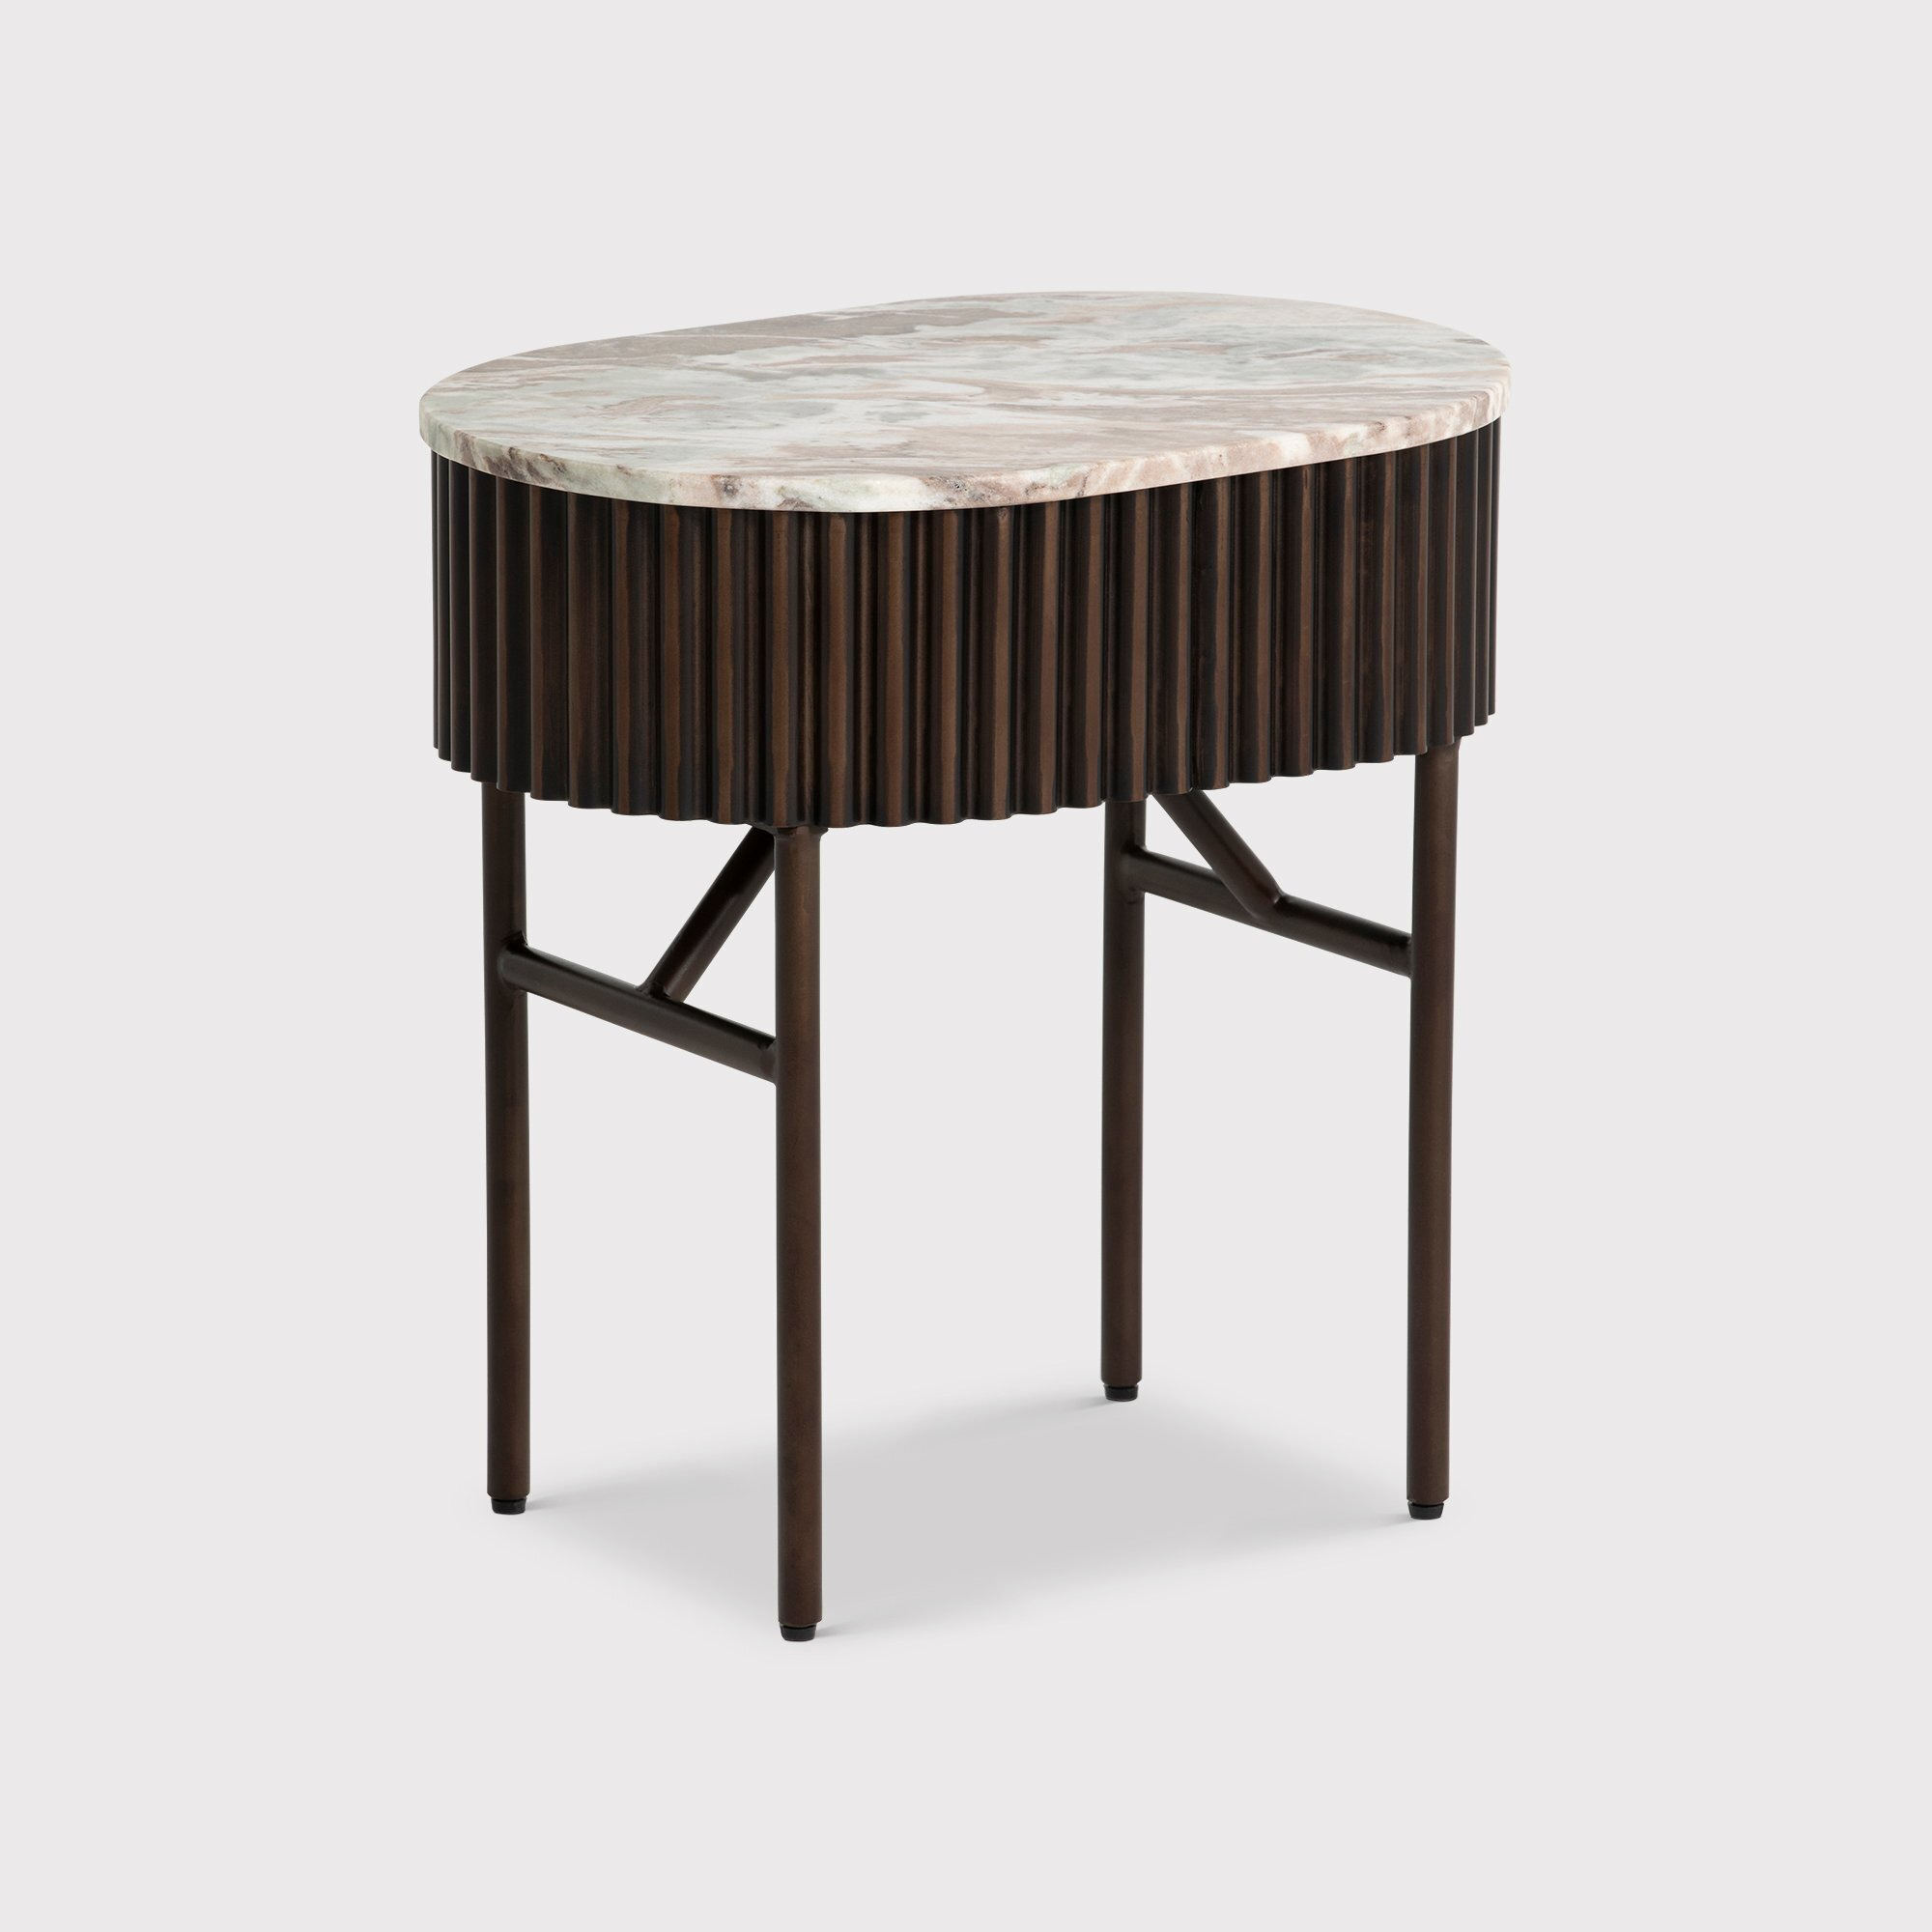 Gion Side Table, Round, Brown Marble - Barker & Stonehouse - image 1